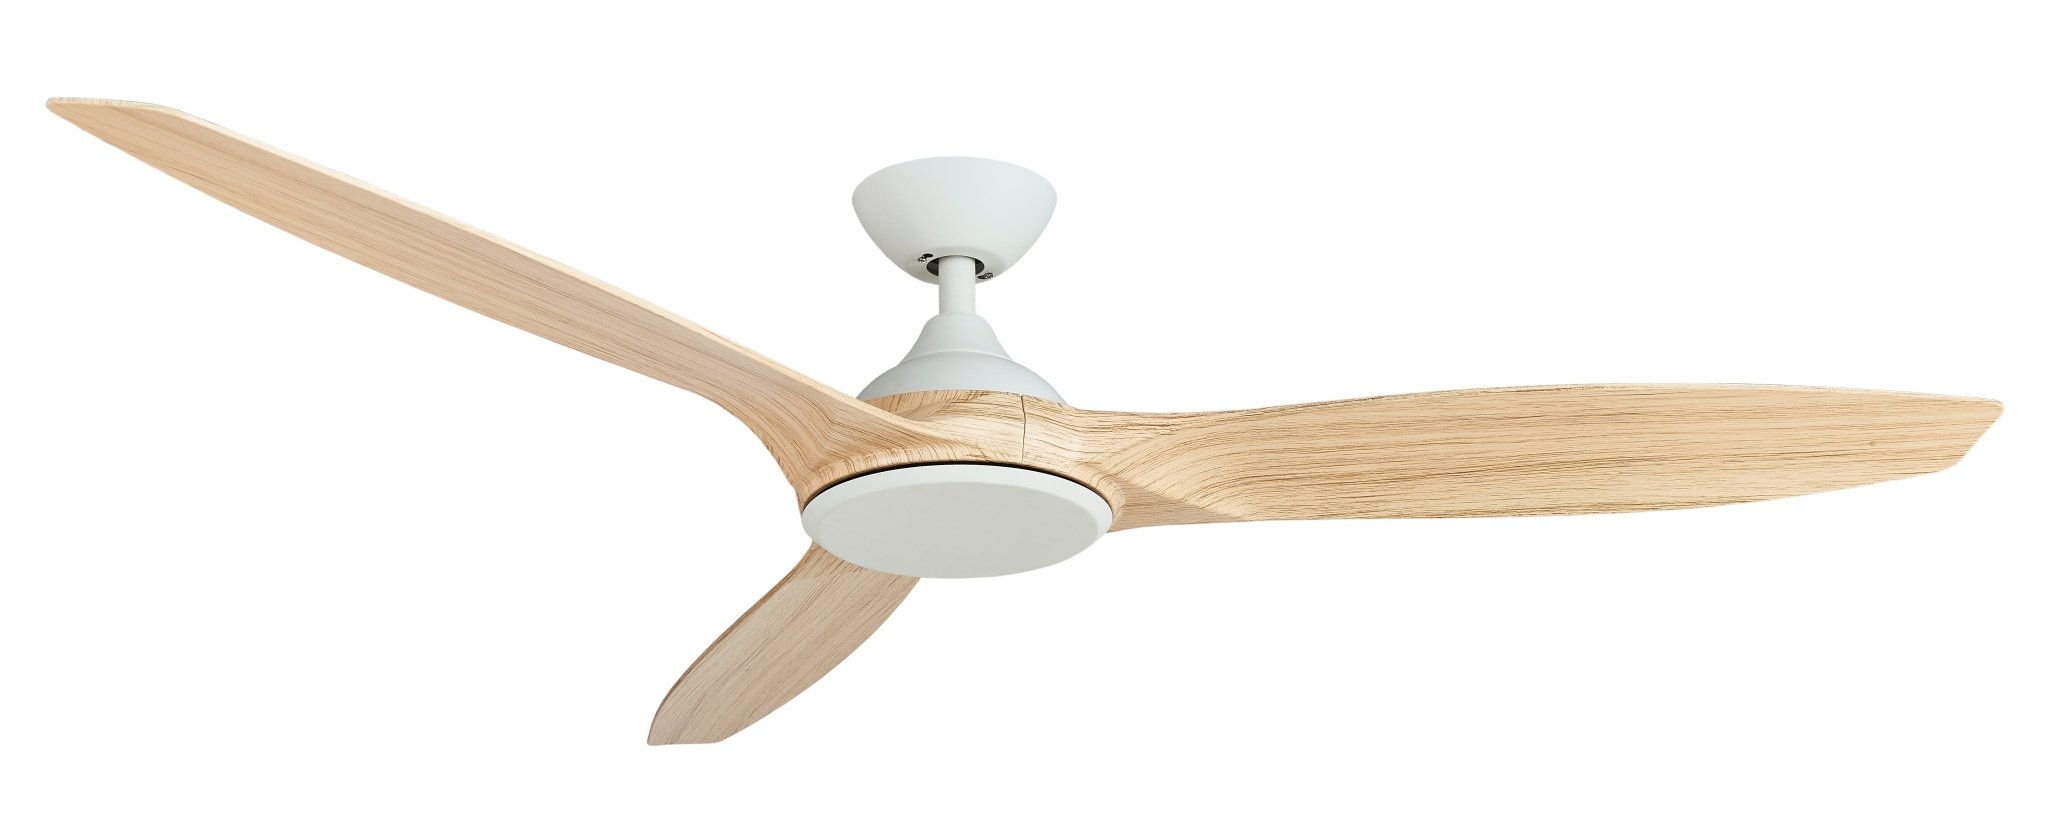 56″ (1420mm) Newport DC Ceiling Fan White Oak with Light Remote Control by Martec - Mases LightingMartec